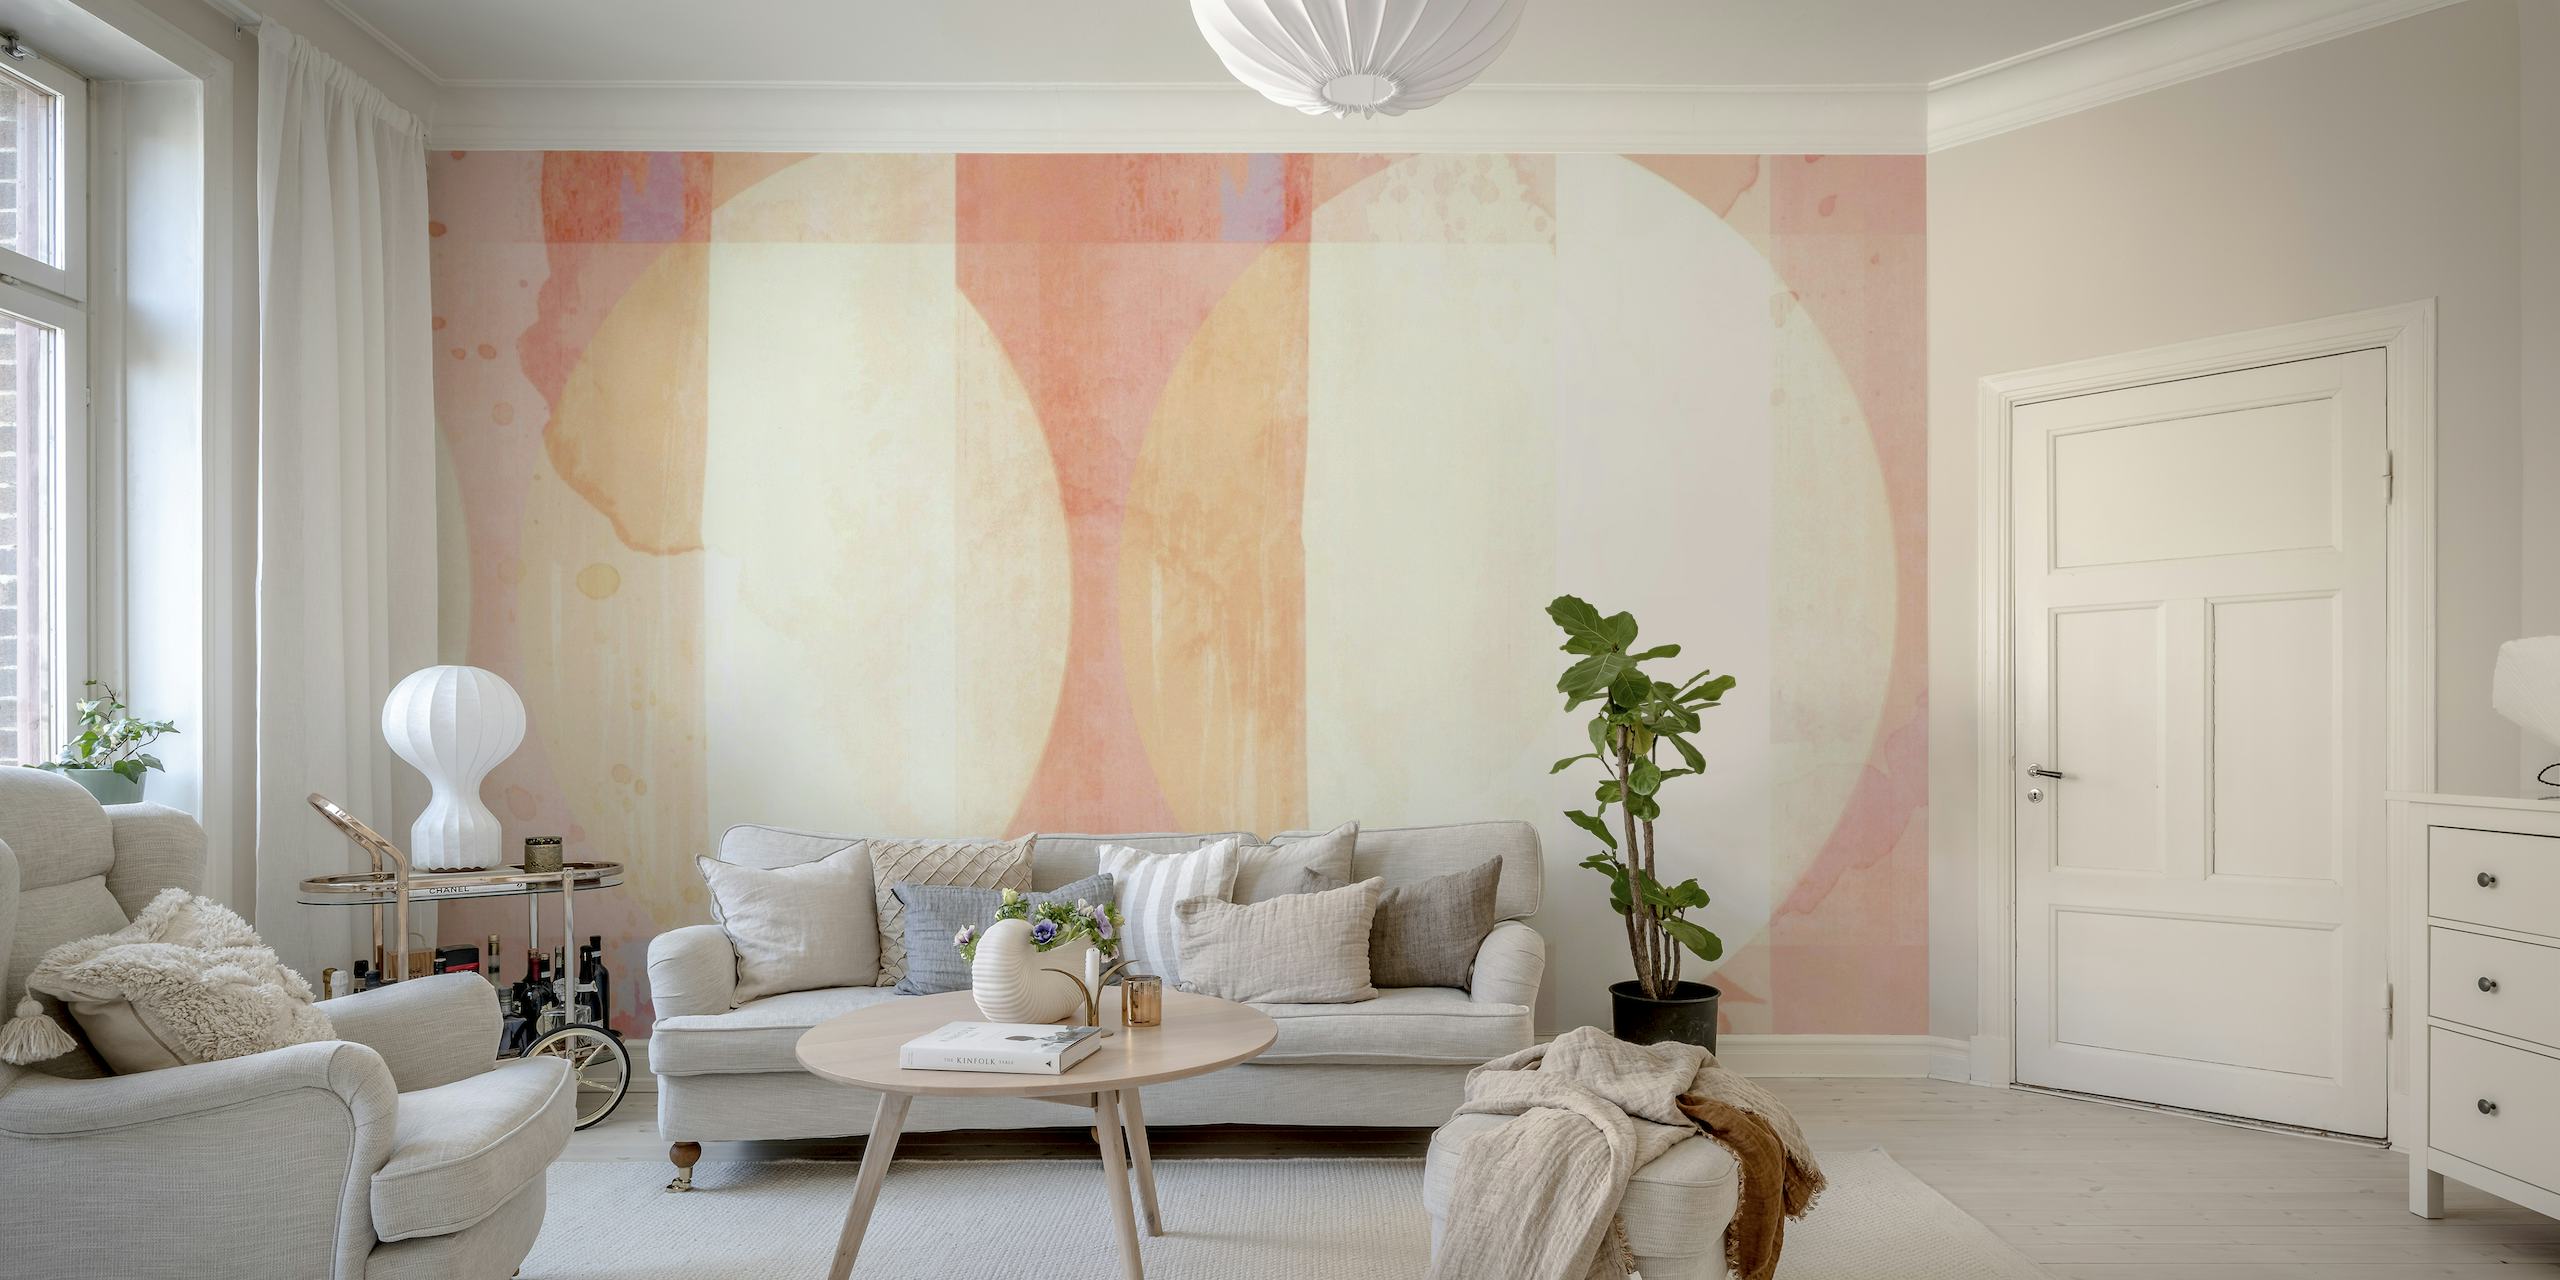 Abstract peach-colored shapes with grunge textures on a wall mural